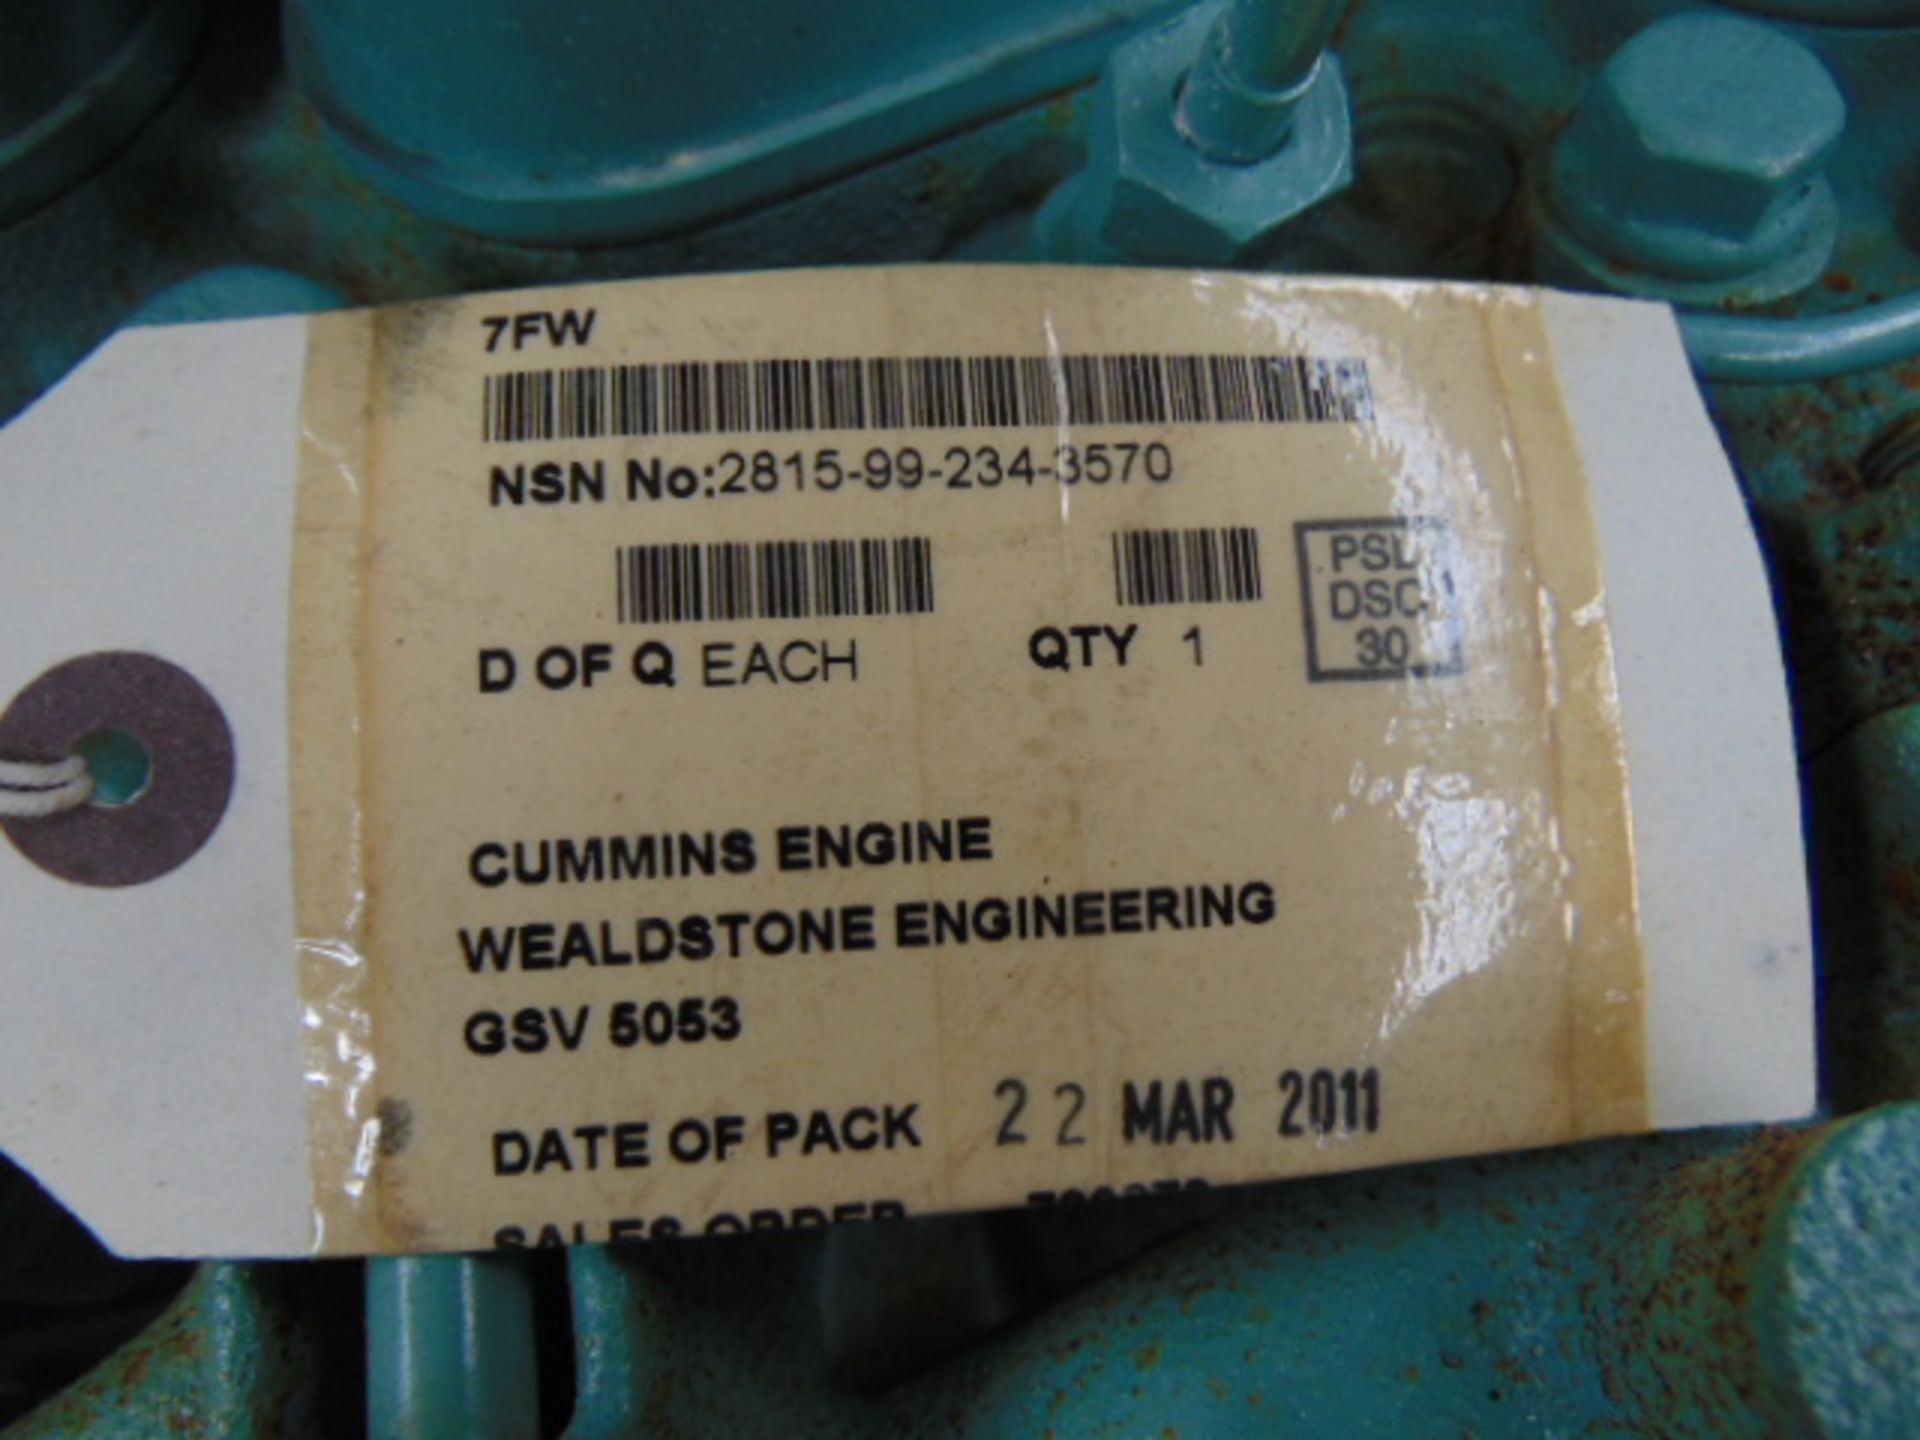 A1 Reconditioned DAF Cummins 310 Diesel Engine - Image 6 of 6